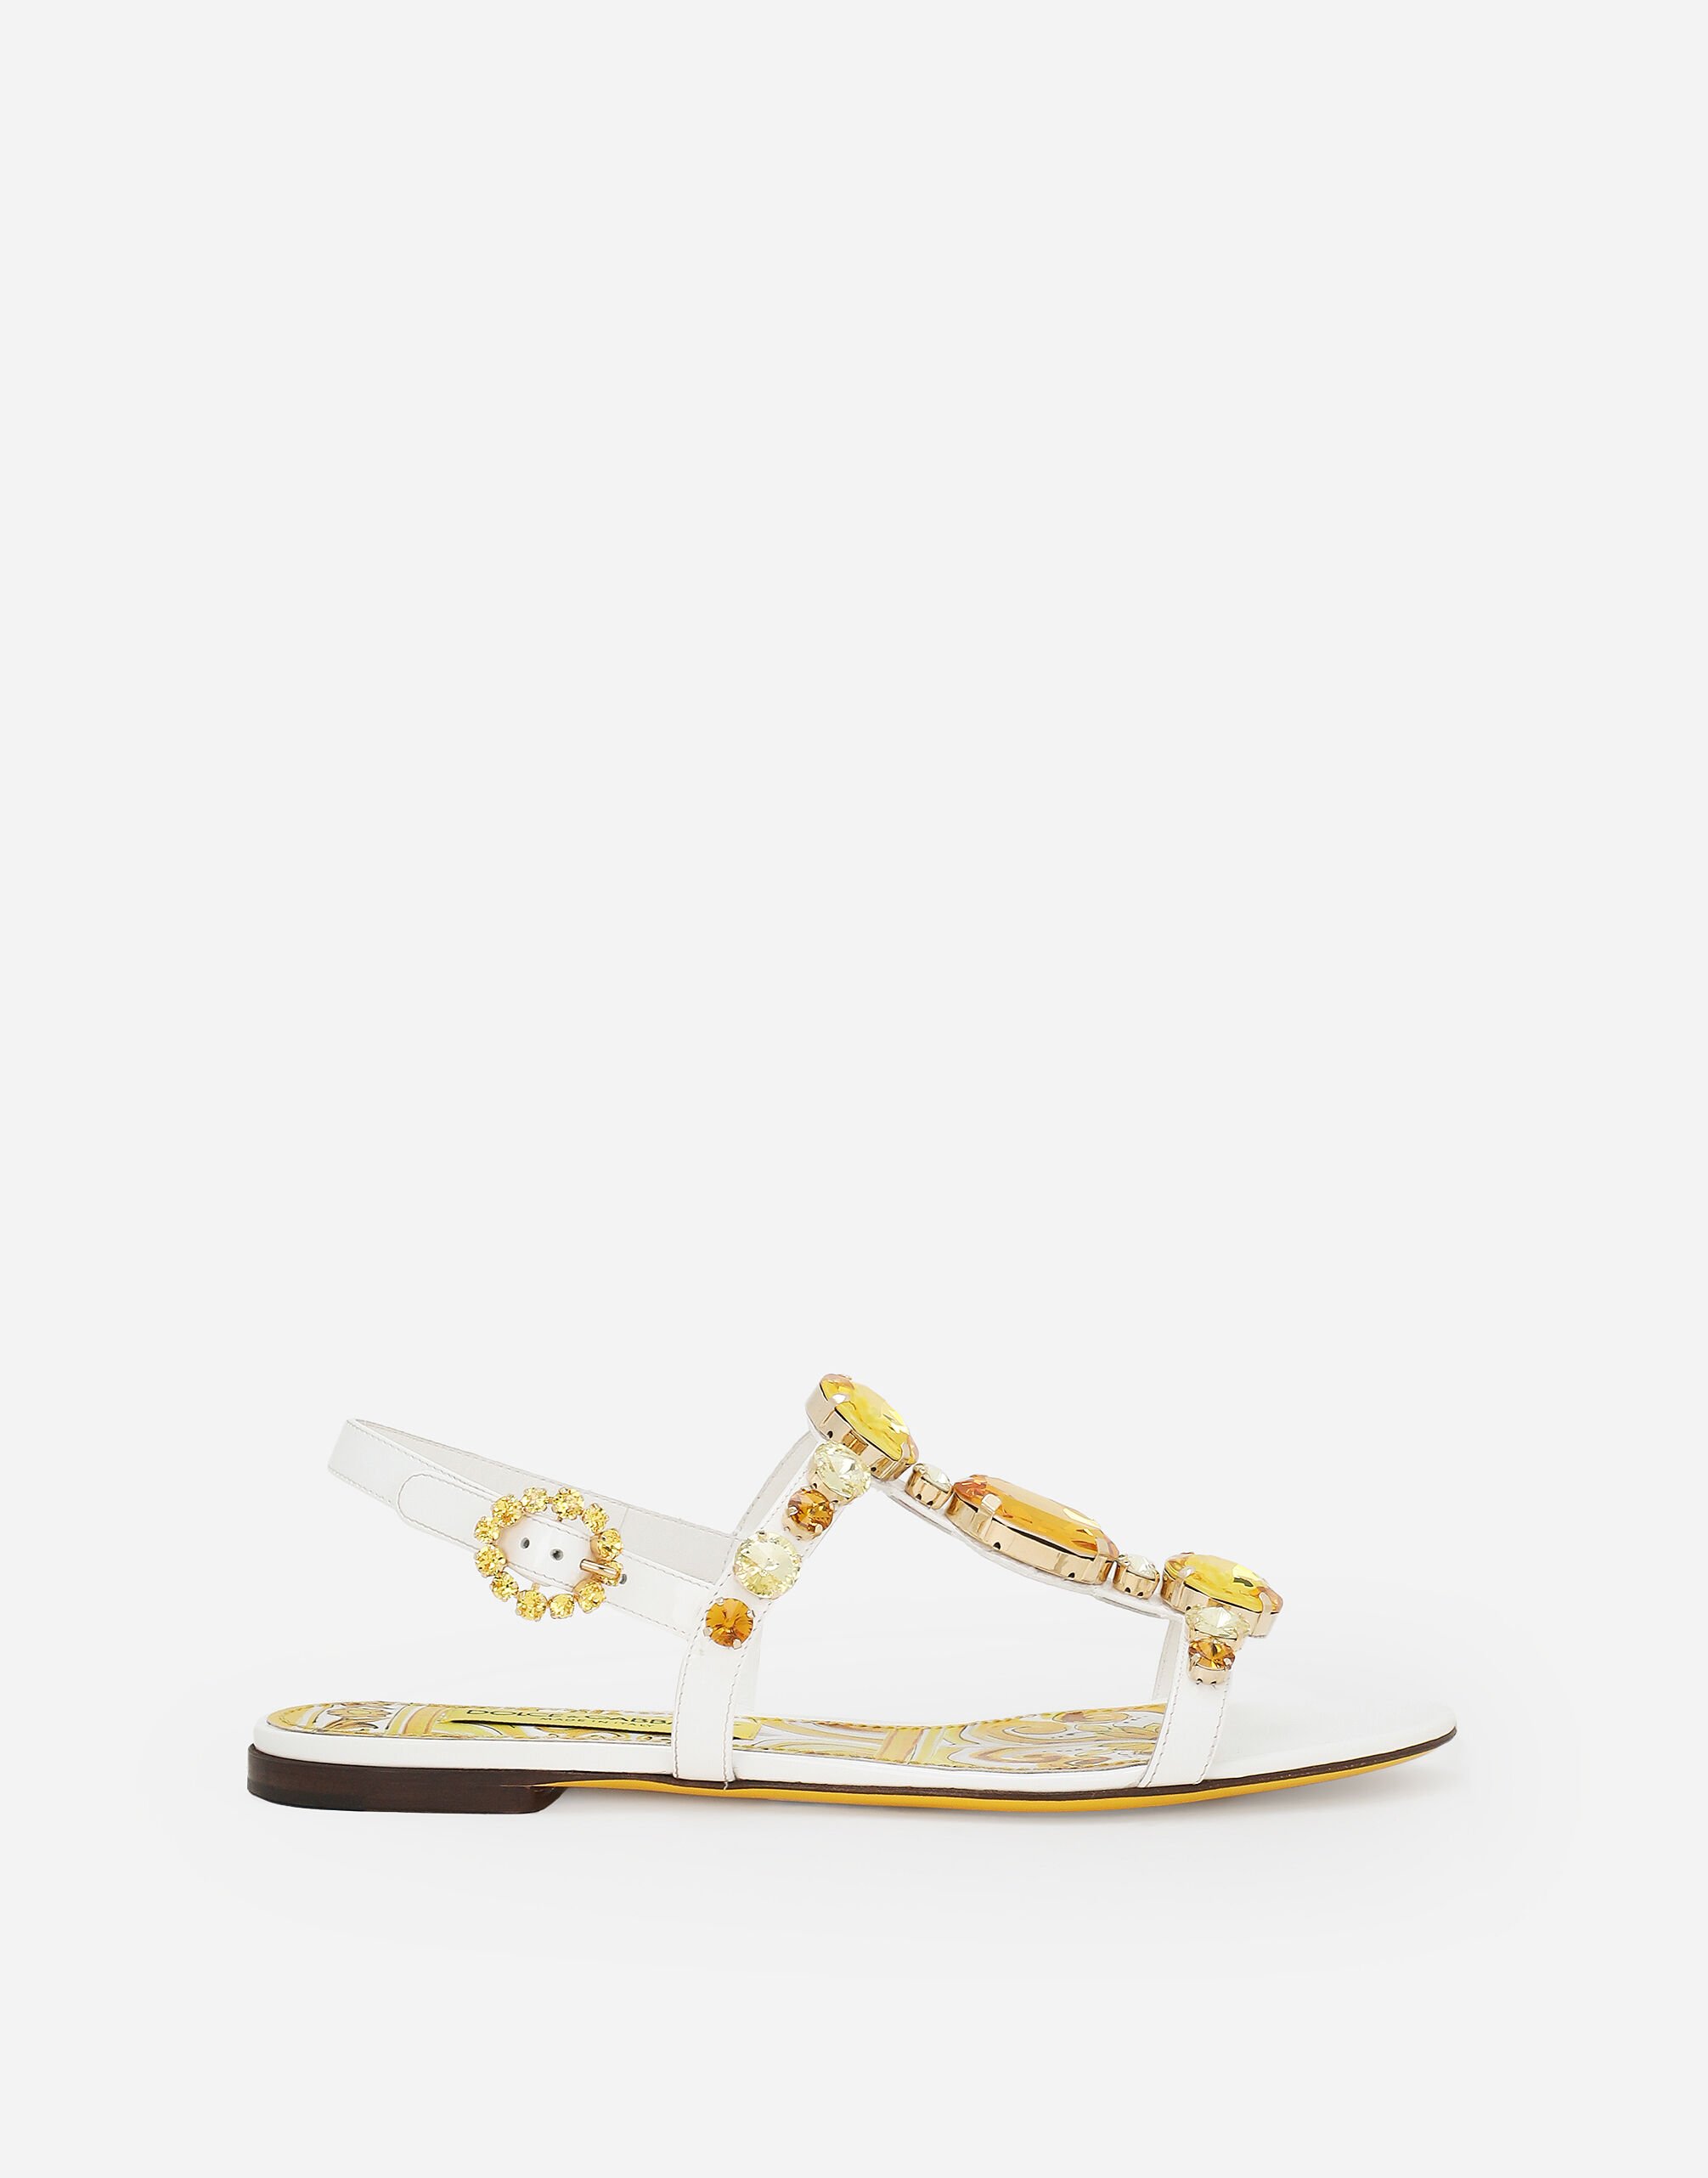 ${brand} Patent leather sandals with stone embellishment ${colorDescription} ${masterID}